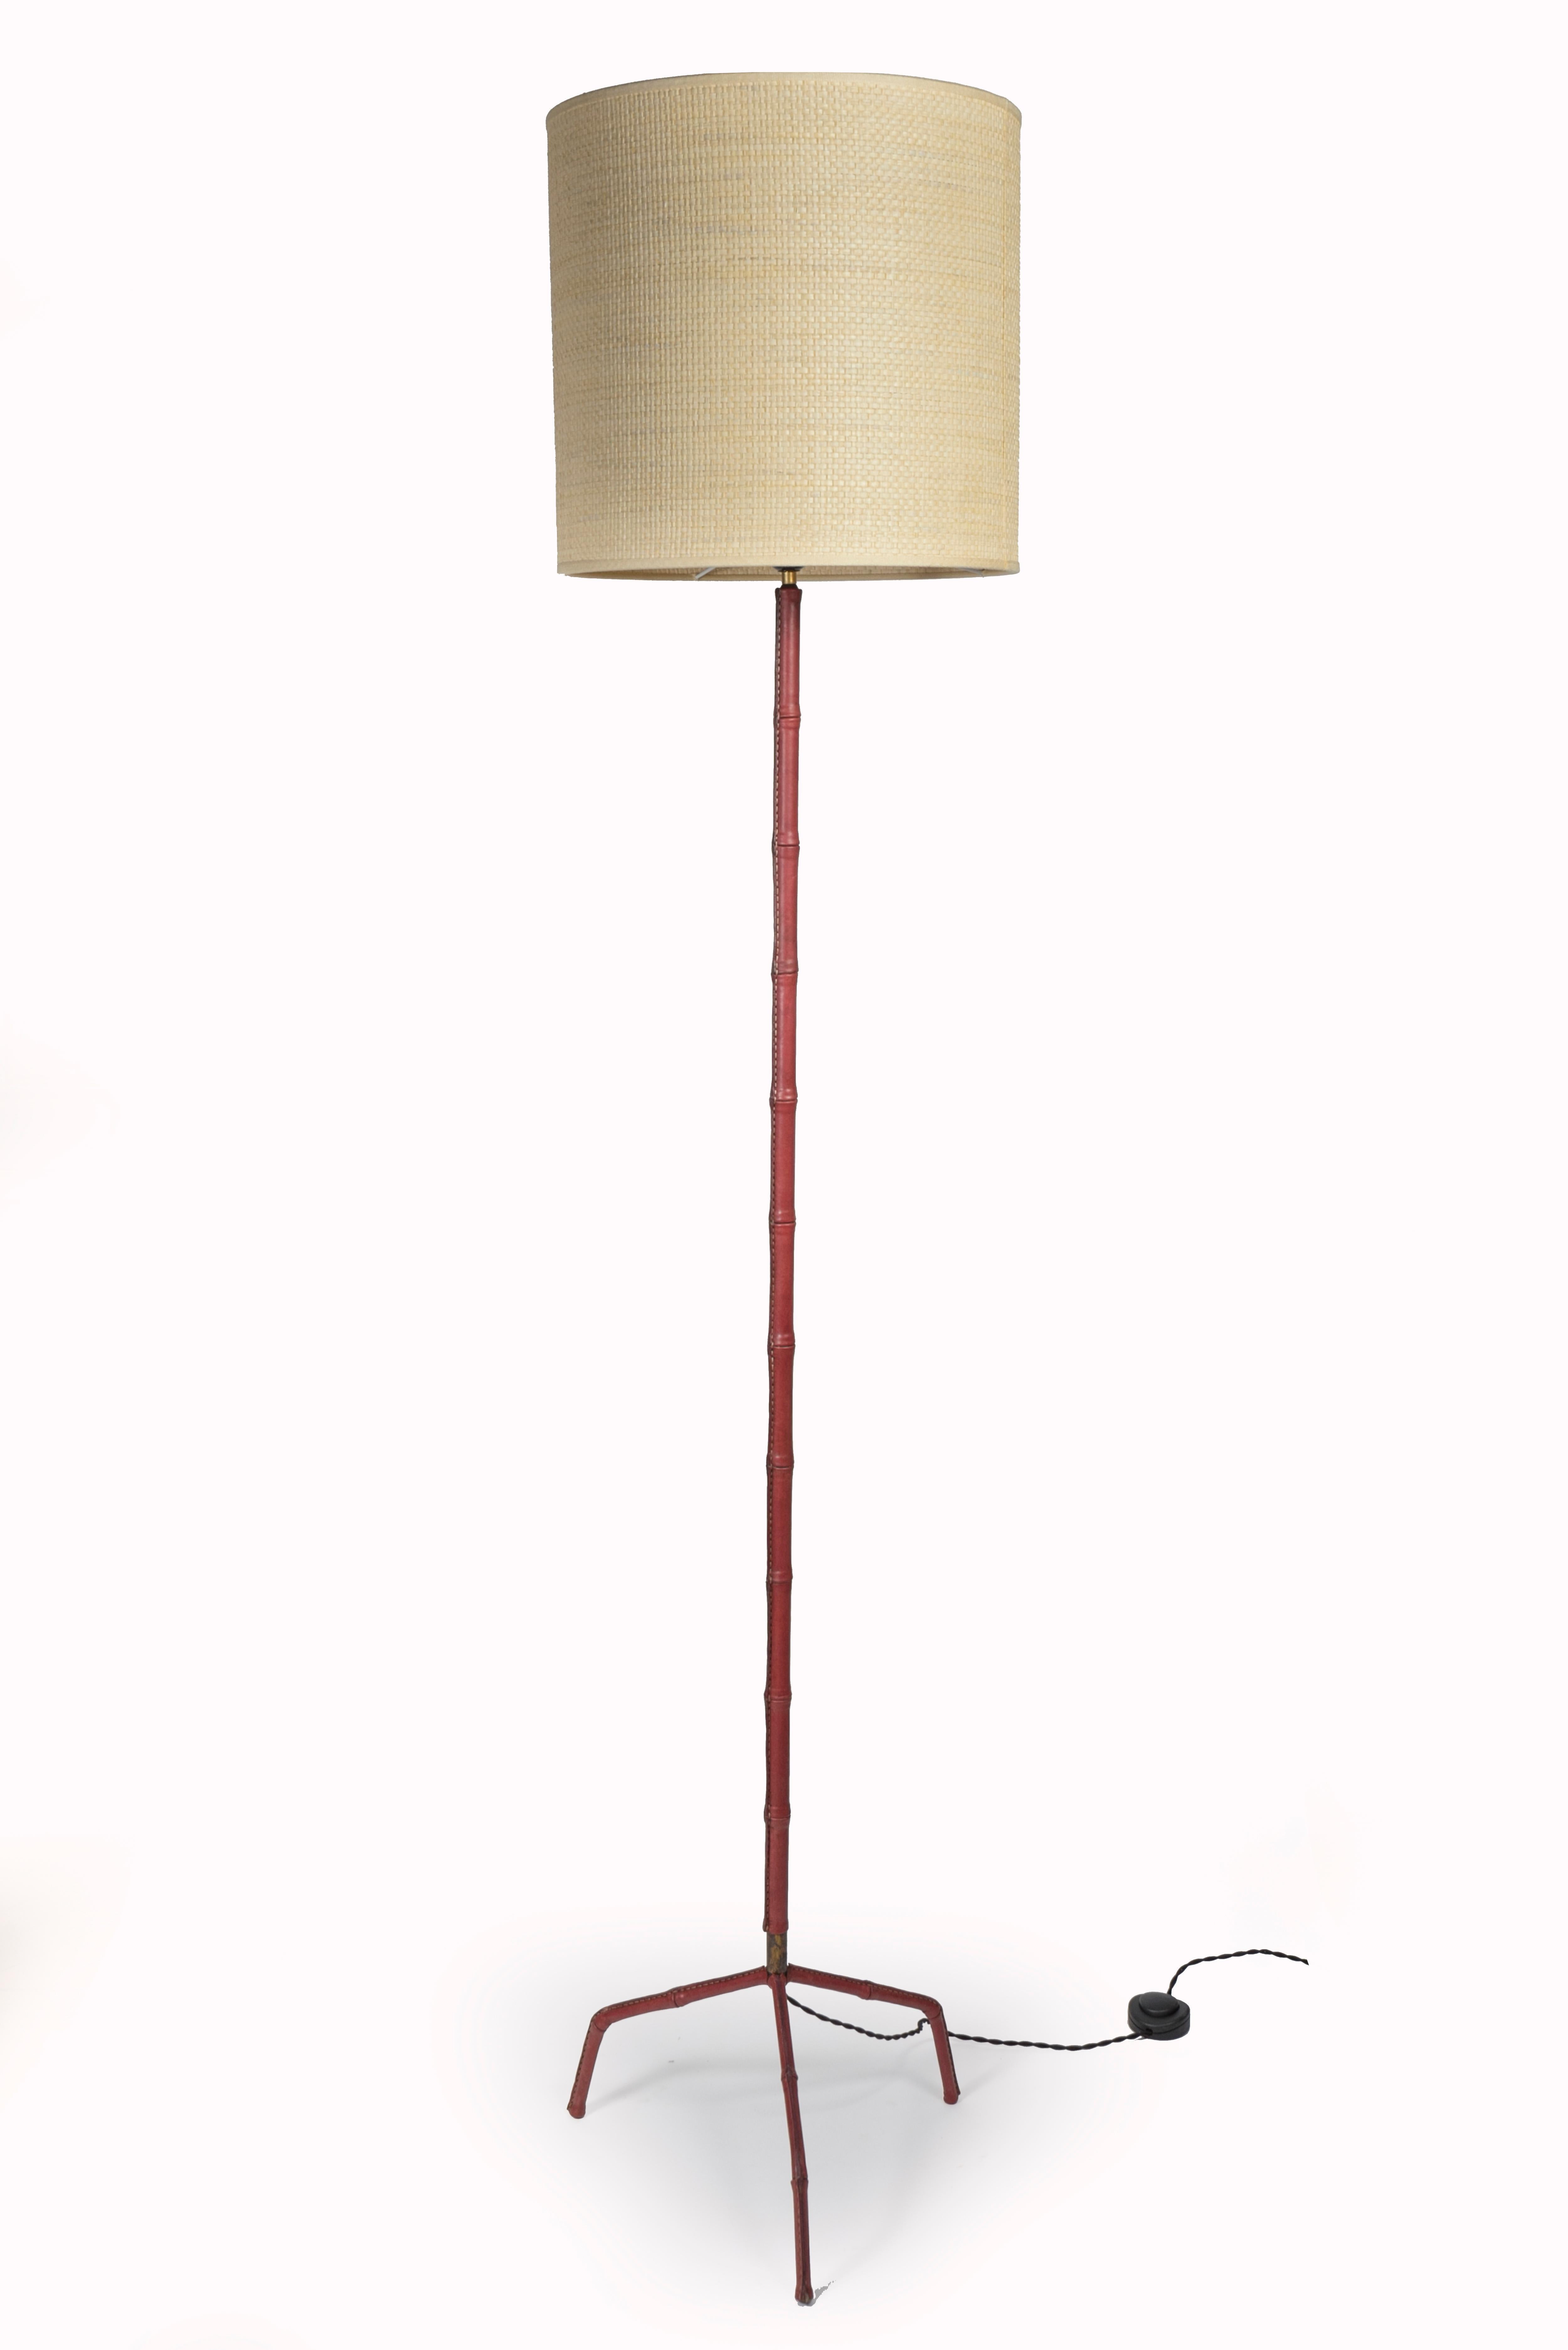 French Stitched Leather Floor Lamp by Jacques Adnet For Sale